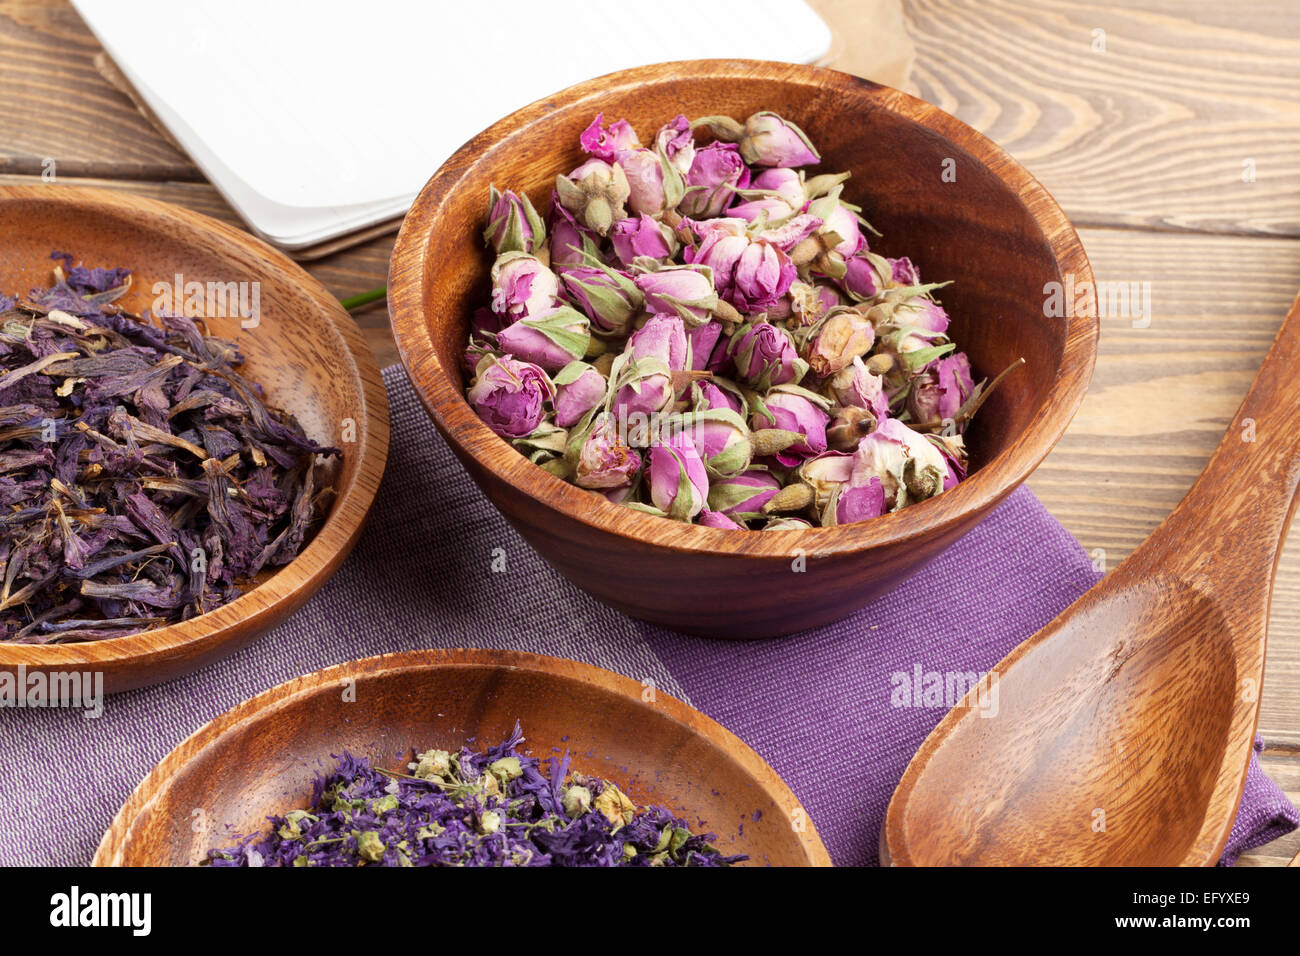 Purple spices and utensils over wooden table Stock Photo